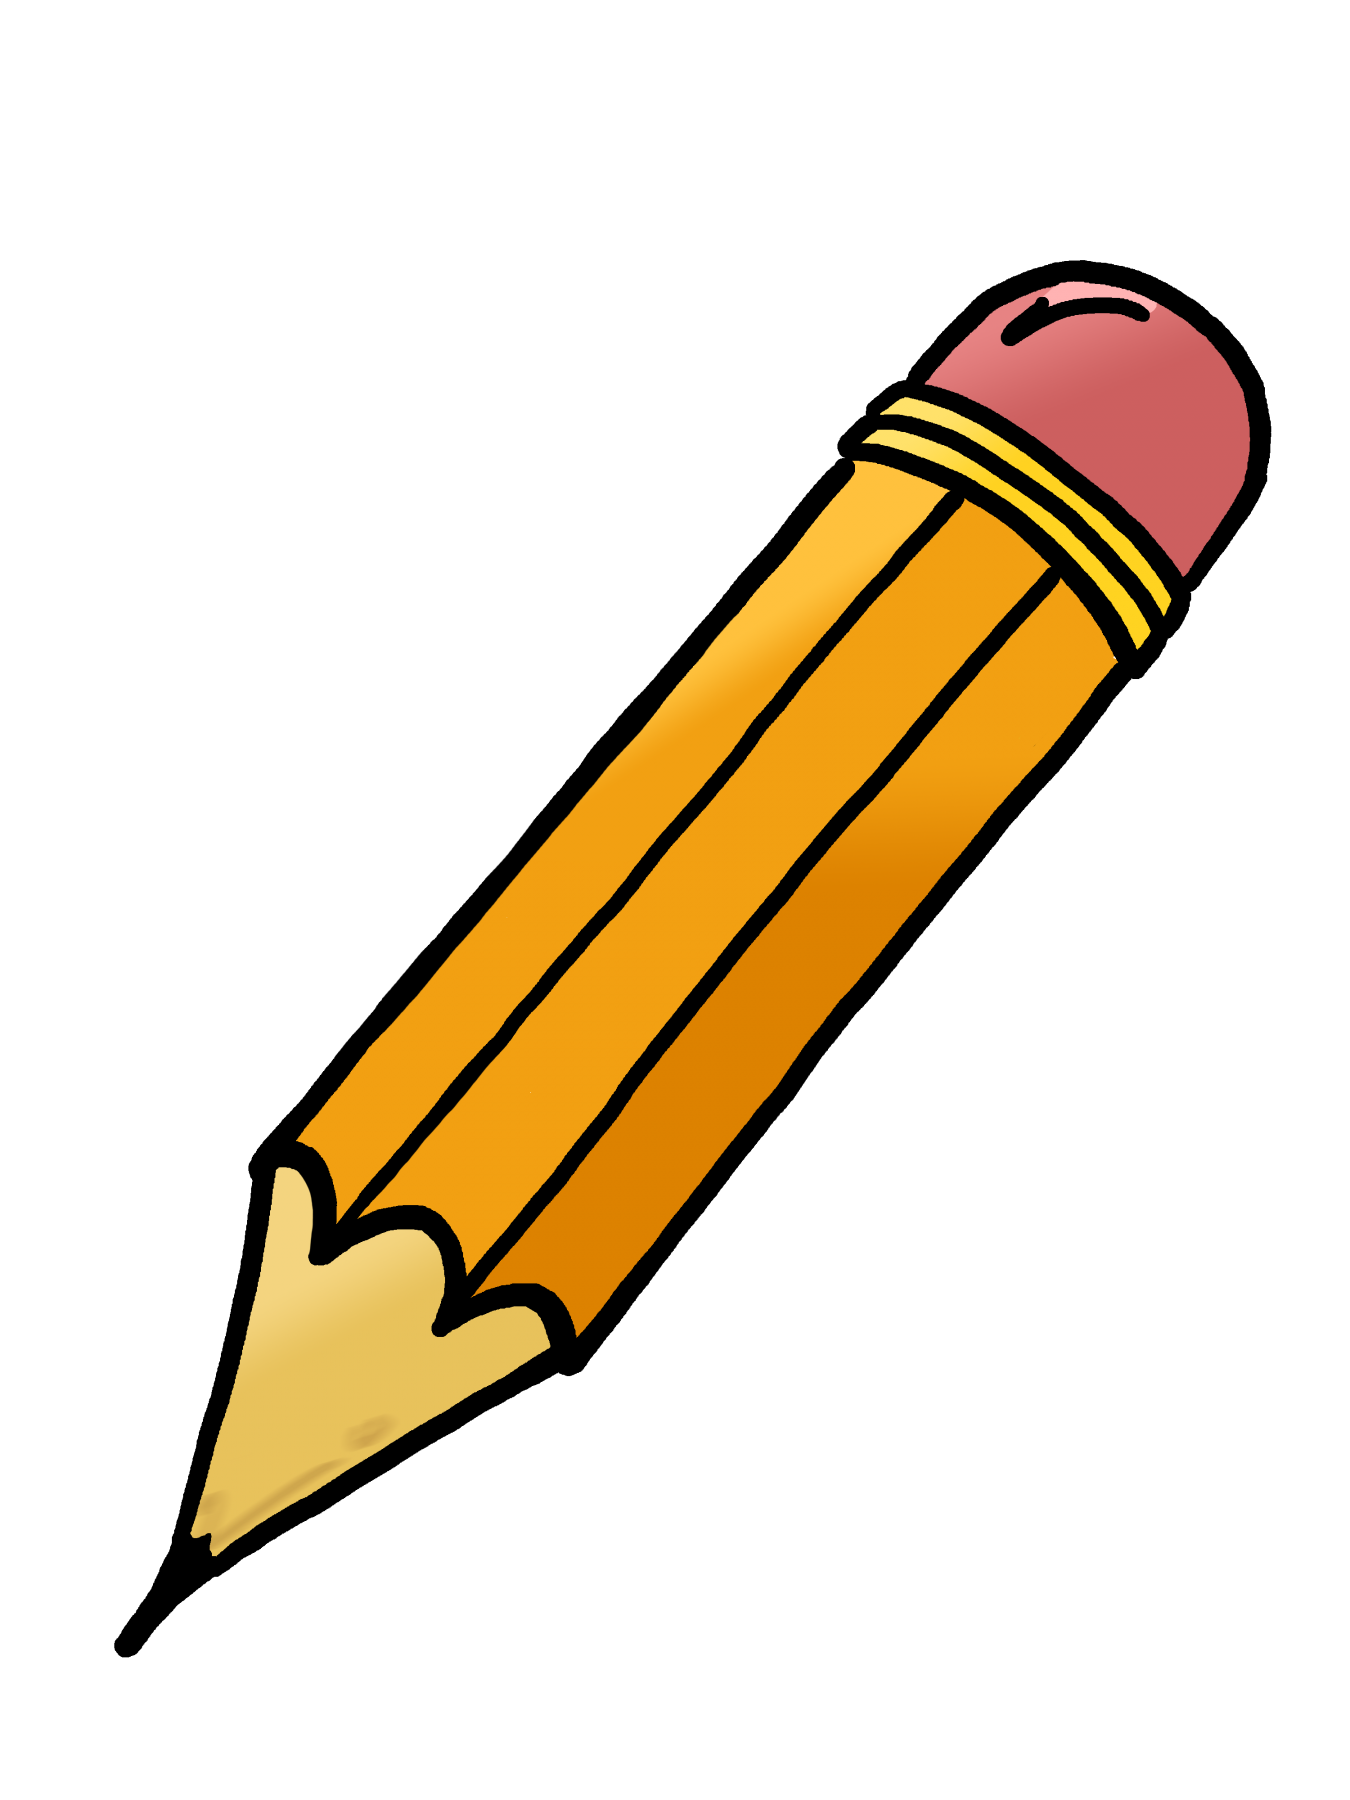 Images free google search. Clipart arrow pencil